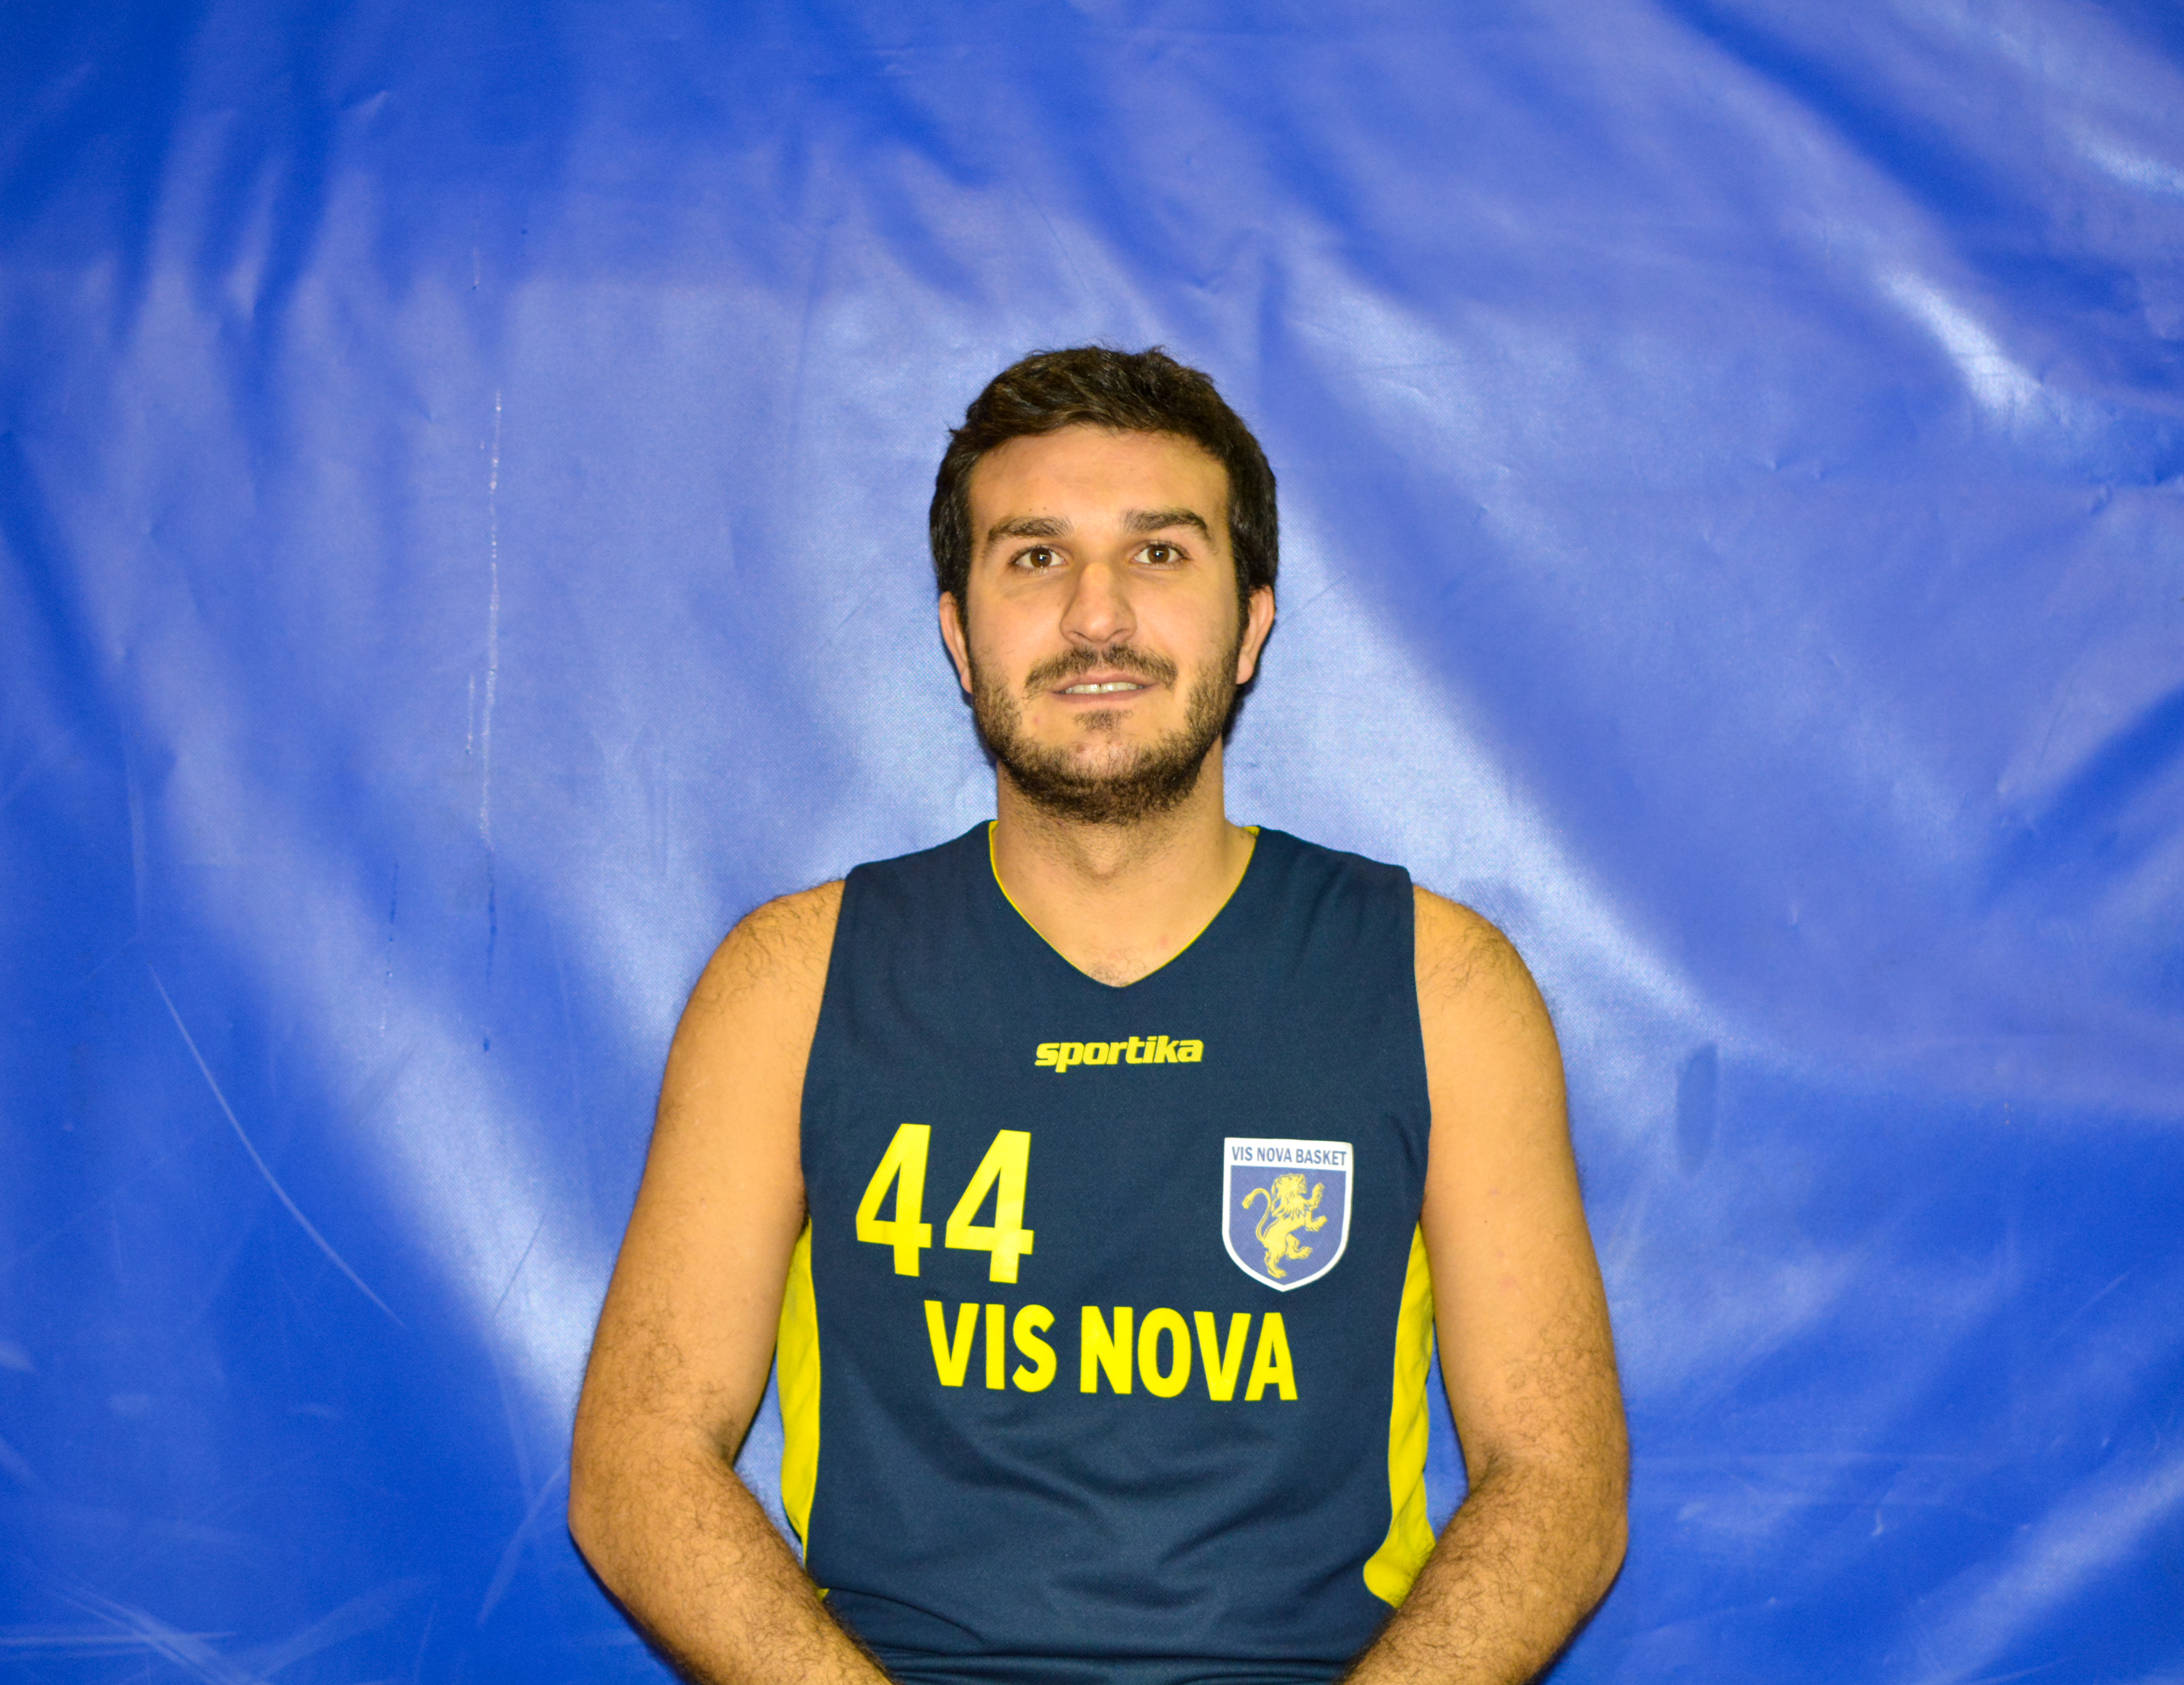 Al momento stai visualizzando <strong class="sp-player-number">44</strong> Giammusso Matteo